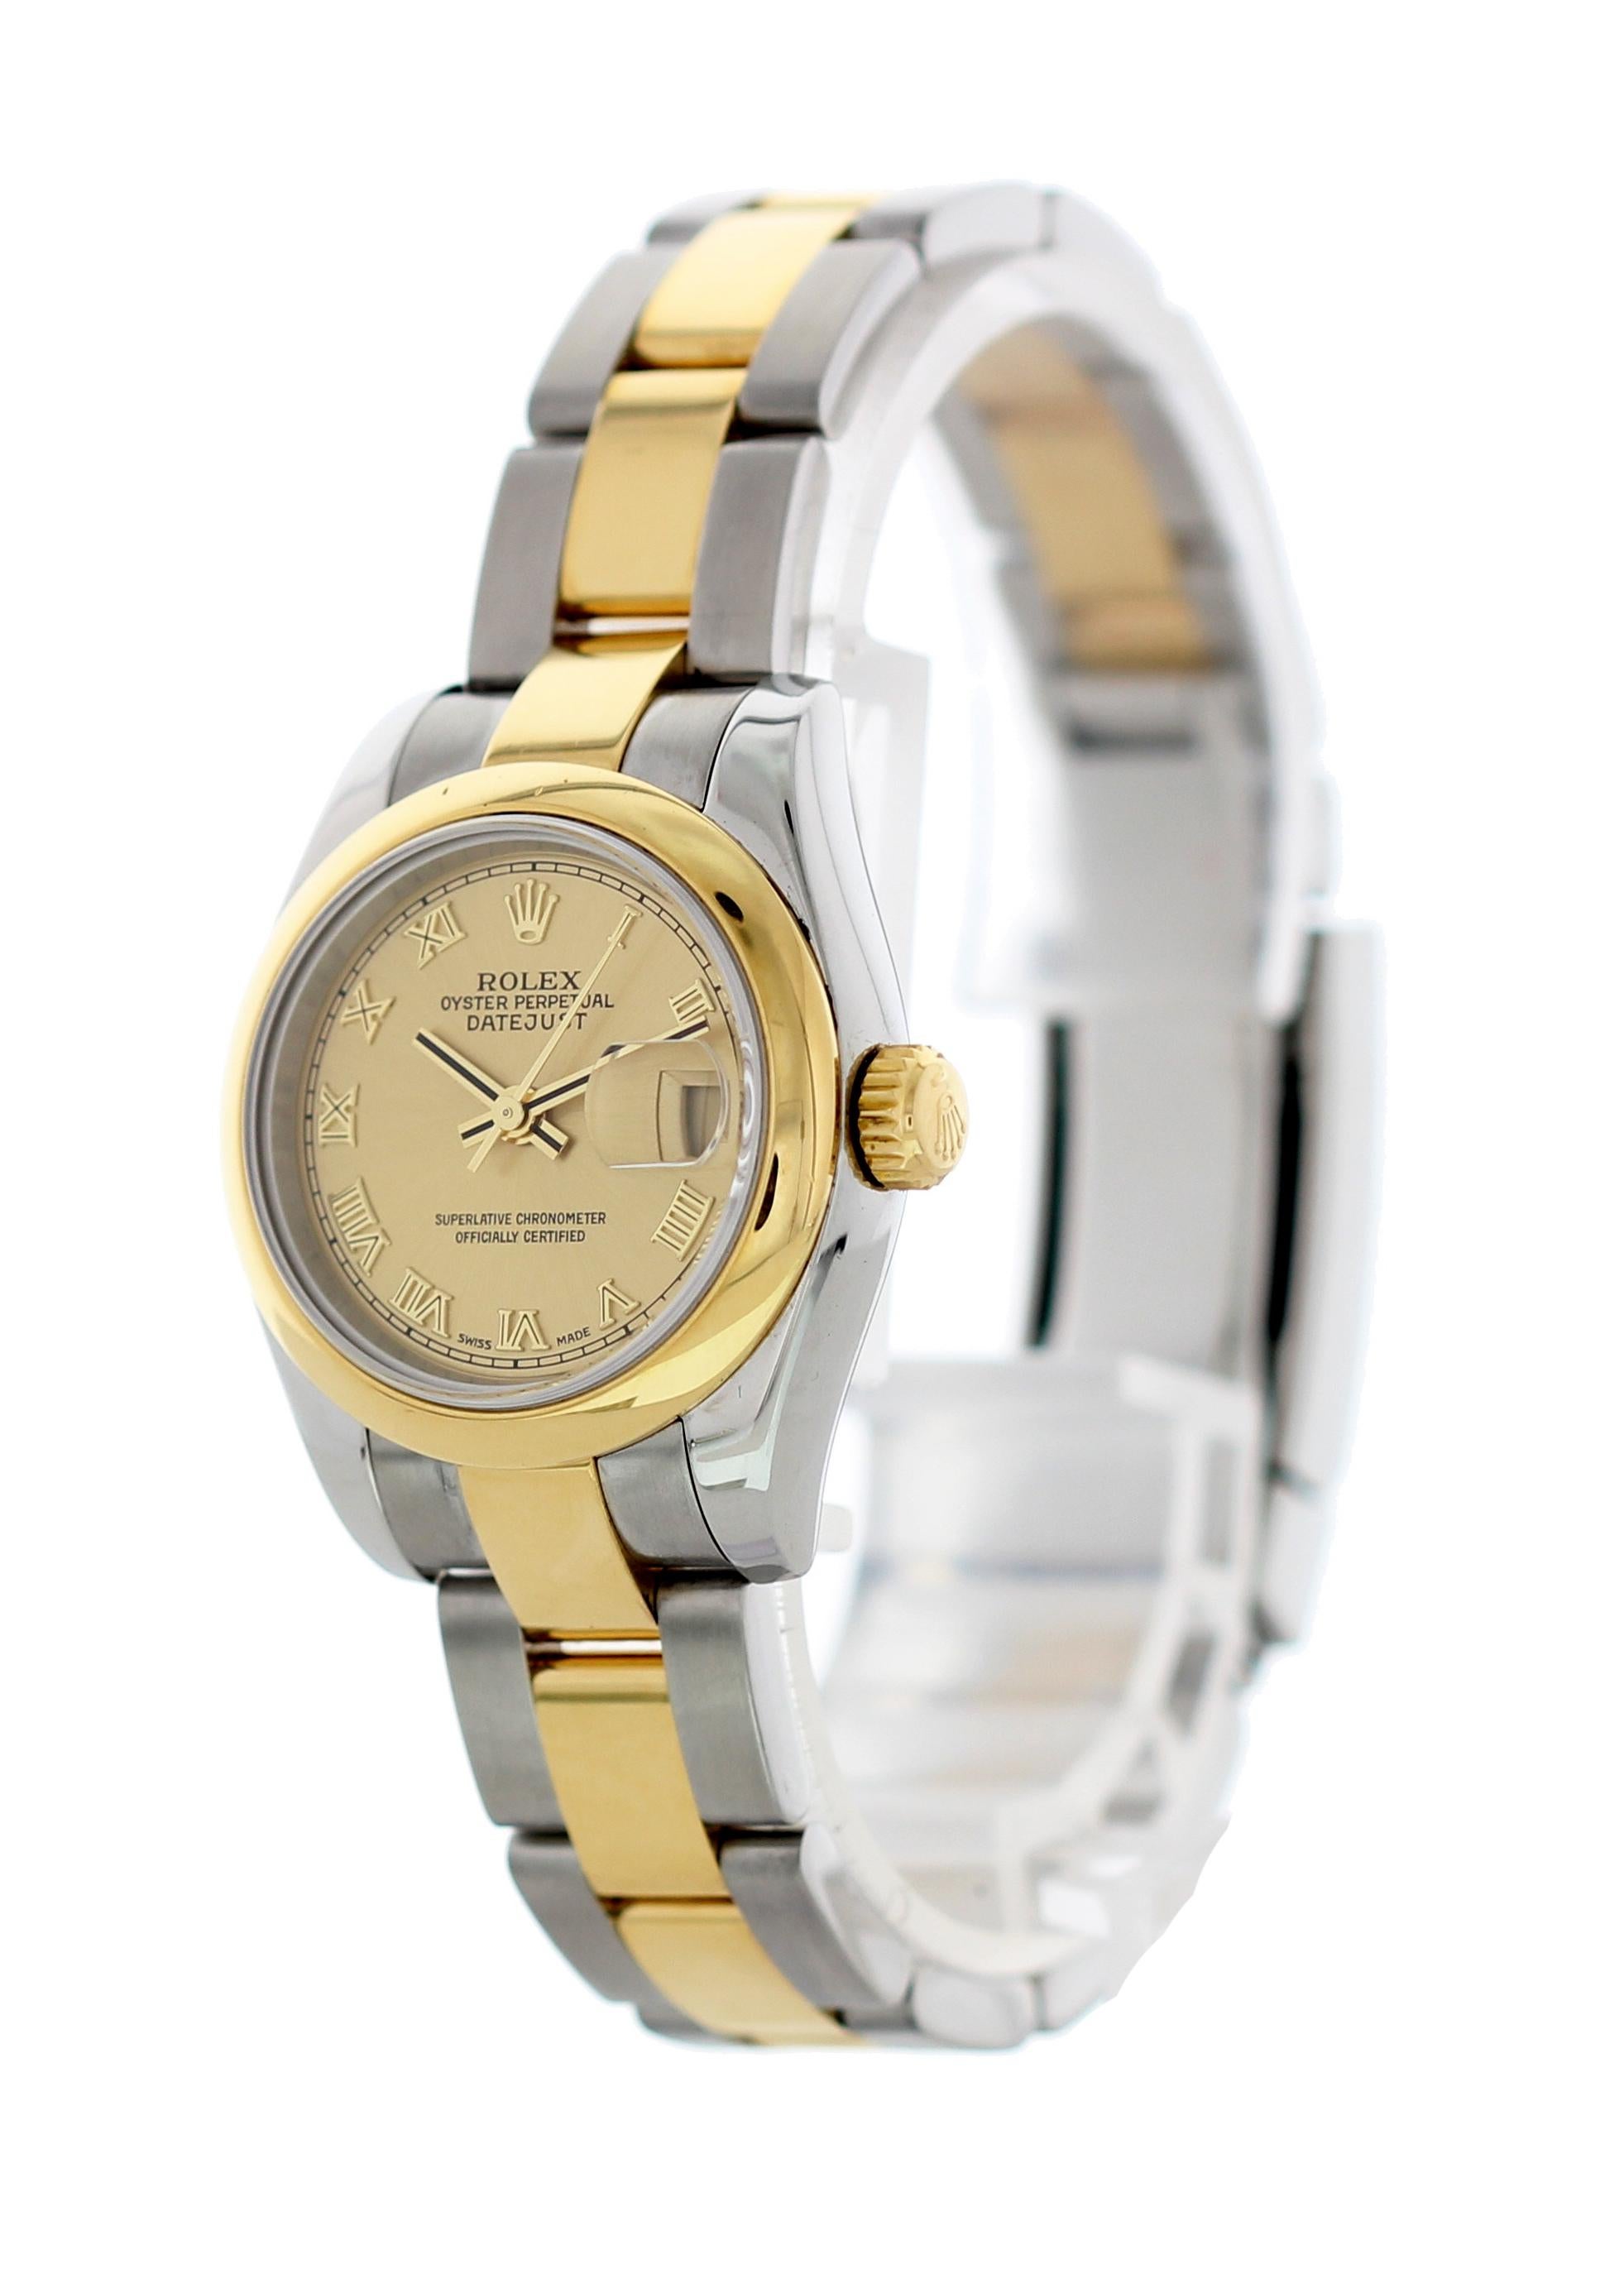 Rolex Oyster Perpetual Datejust 179163 Ladies Watch. 26mm stainless steel case with 18k yellow gold stationary bezel and crown. Champagne dial with Roman numeral hour markers. Date display.  26mm two-tone stainless steel and 18k yellow gold